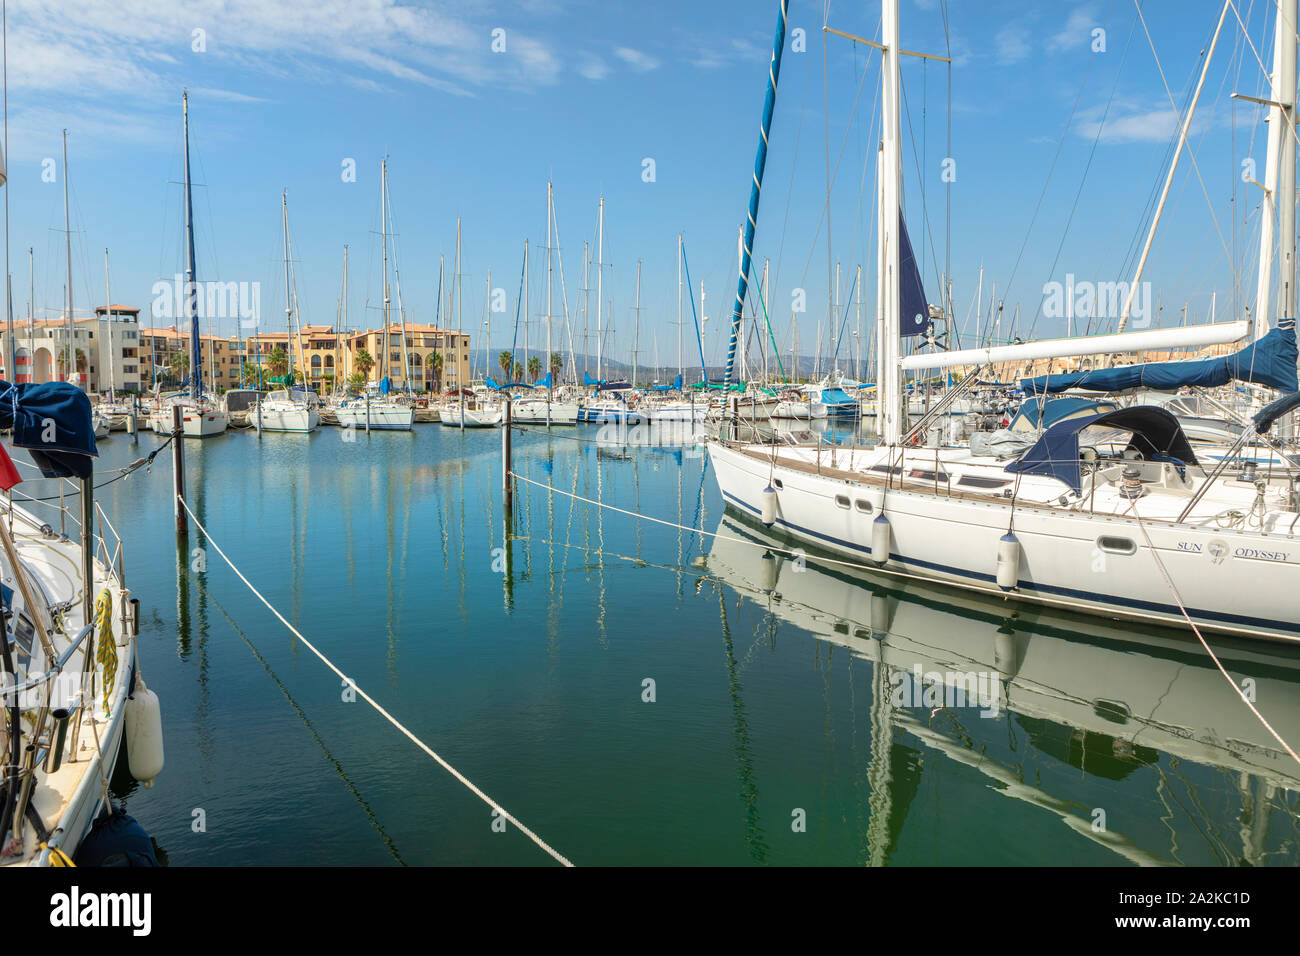 The marina at Port Leucate, South of France. Stock Photo